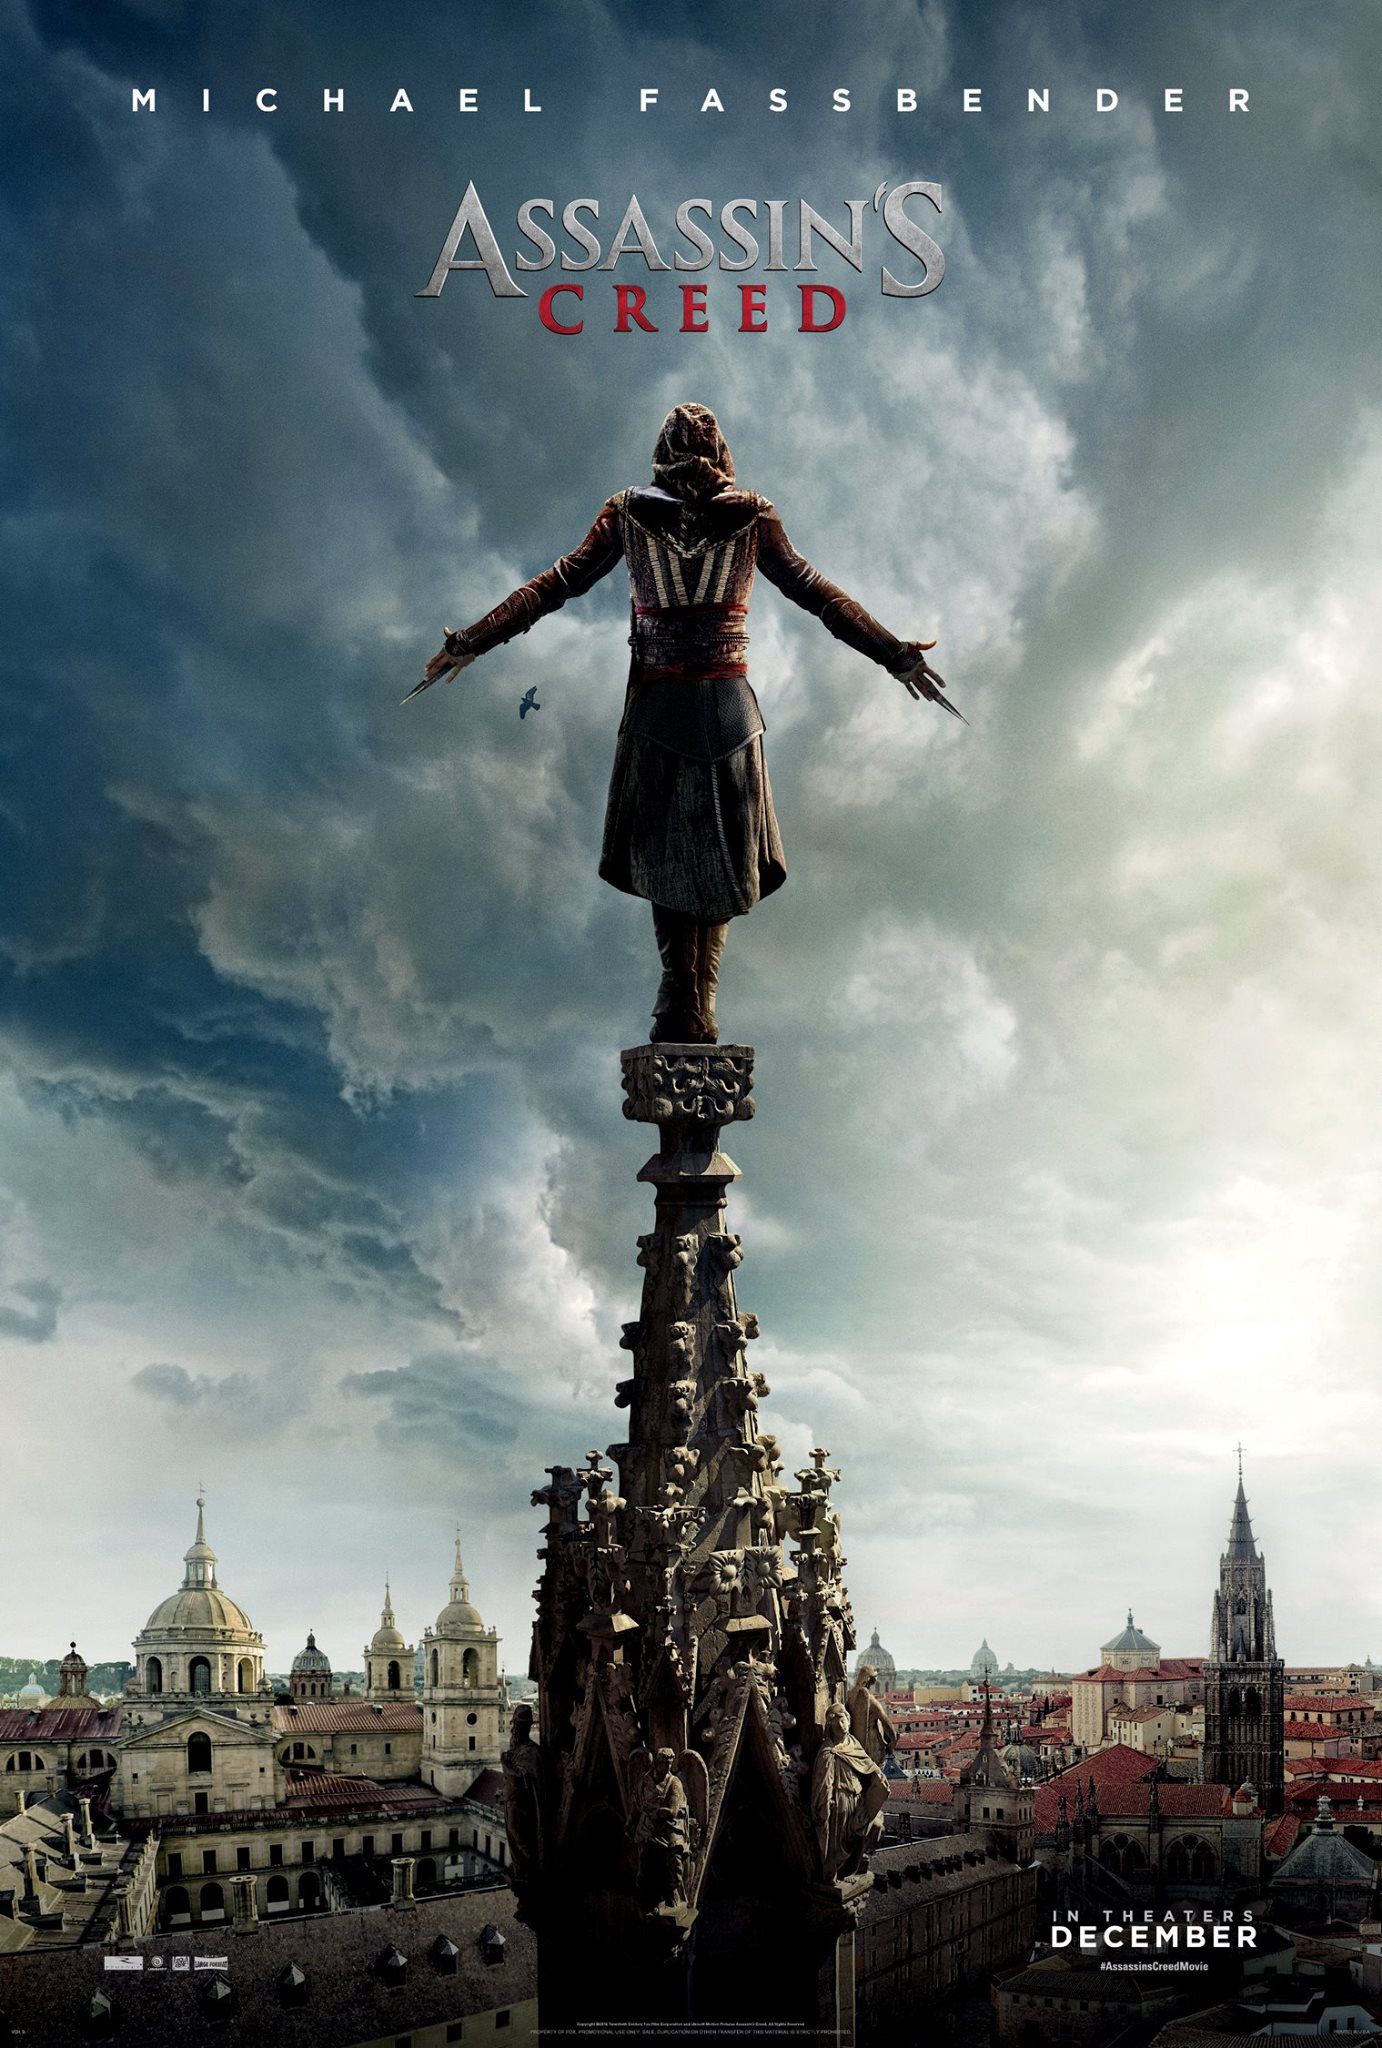 Assassin's Creed - Aguilar poster